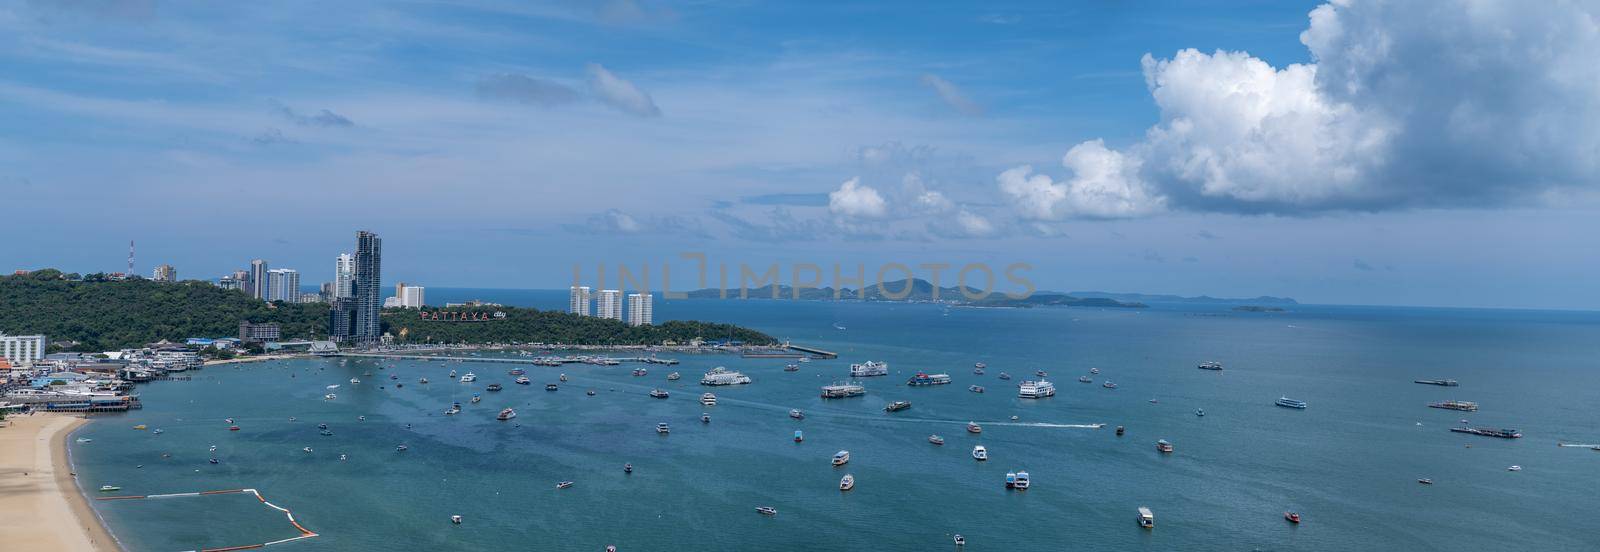 Aerial view of Pattaya city alphabet on the mountain, Pattaya, panoramic view over the skyline of Pattaya city Thailand by fokkebok